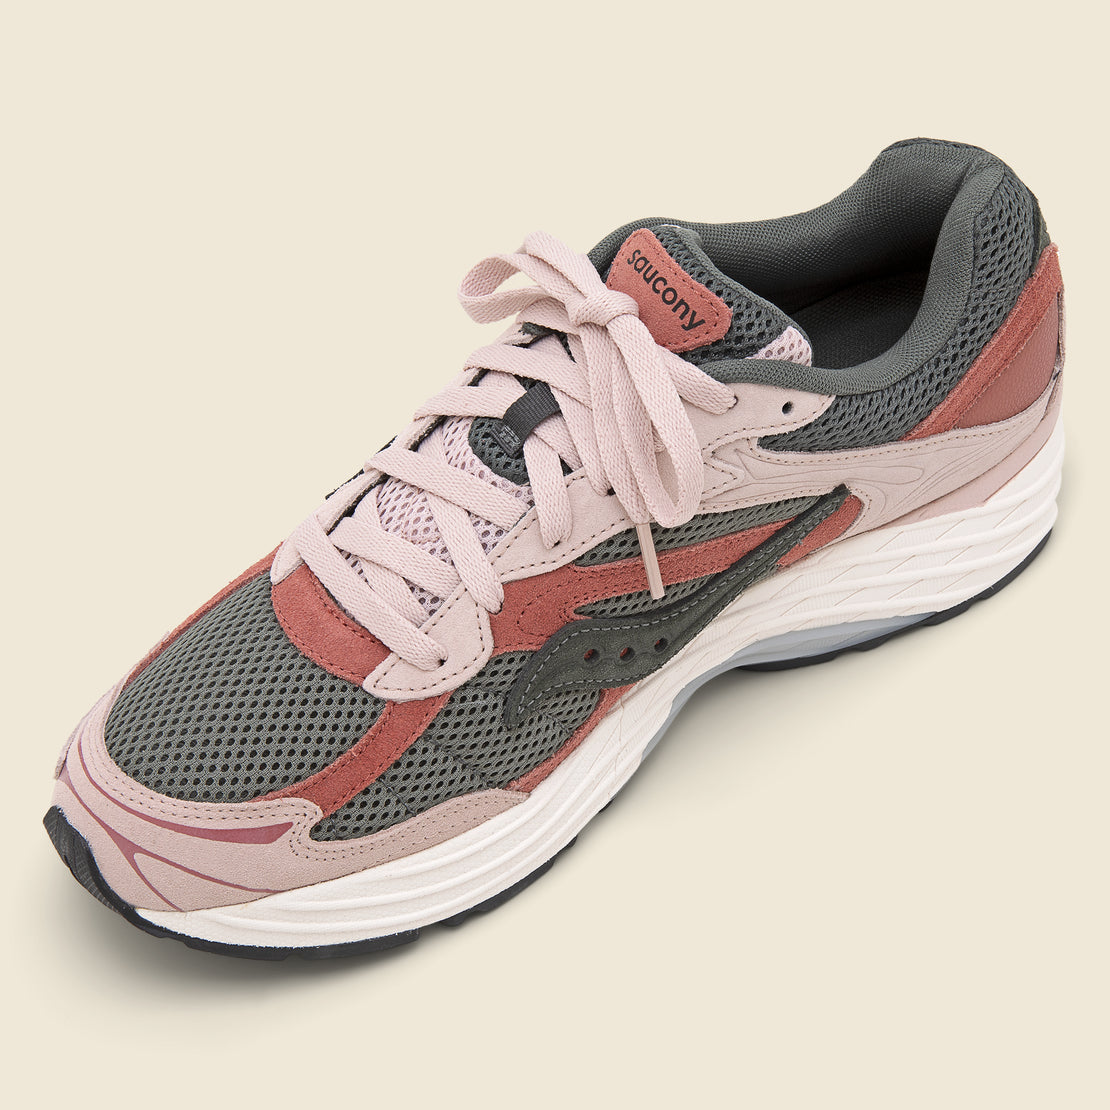 Progrid Omni 9 Sneaker - Pink/Charcoal - Saucony - STAG Provisions - Shoes - Athletic